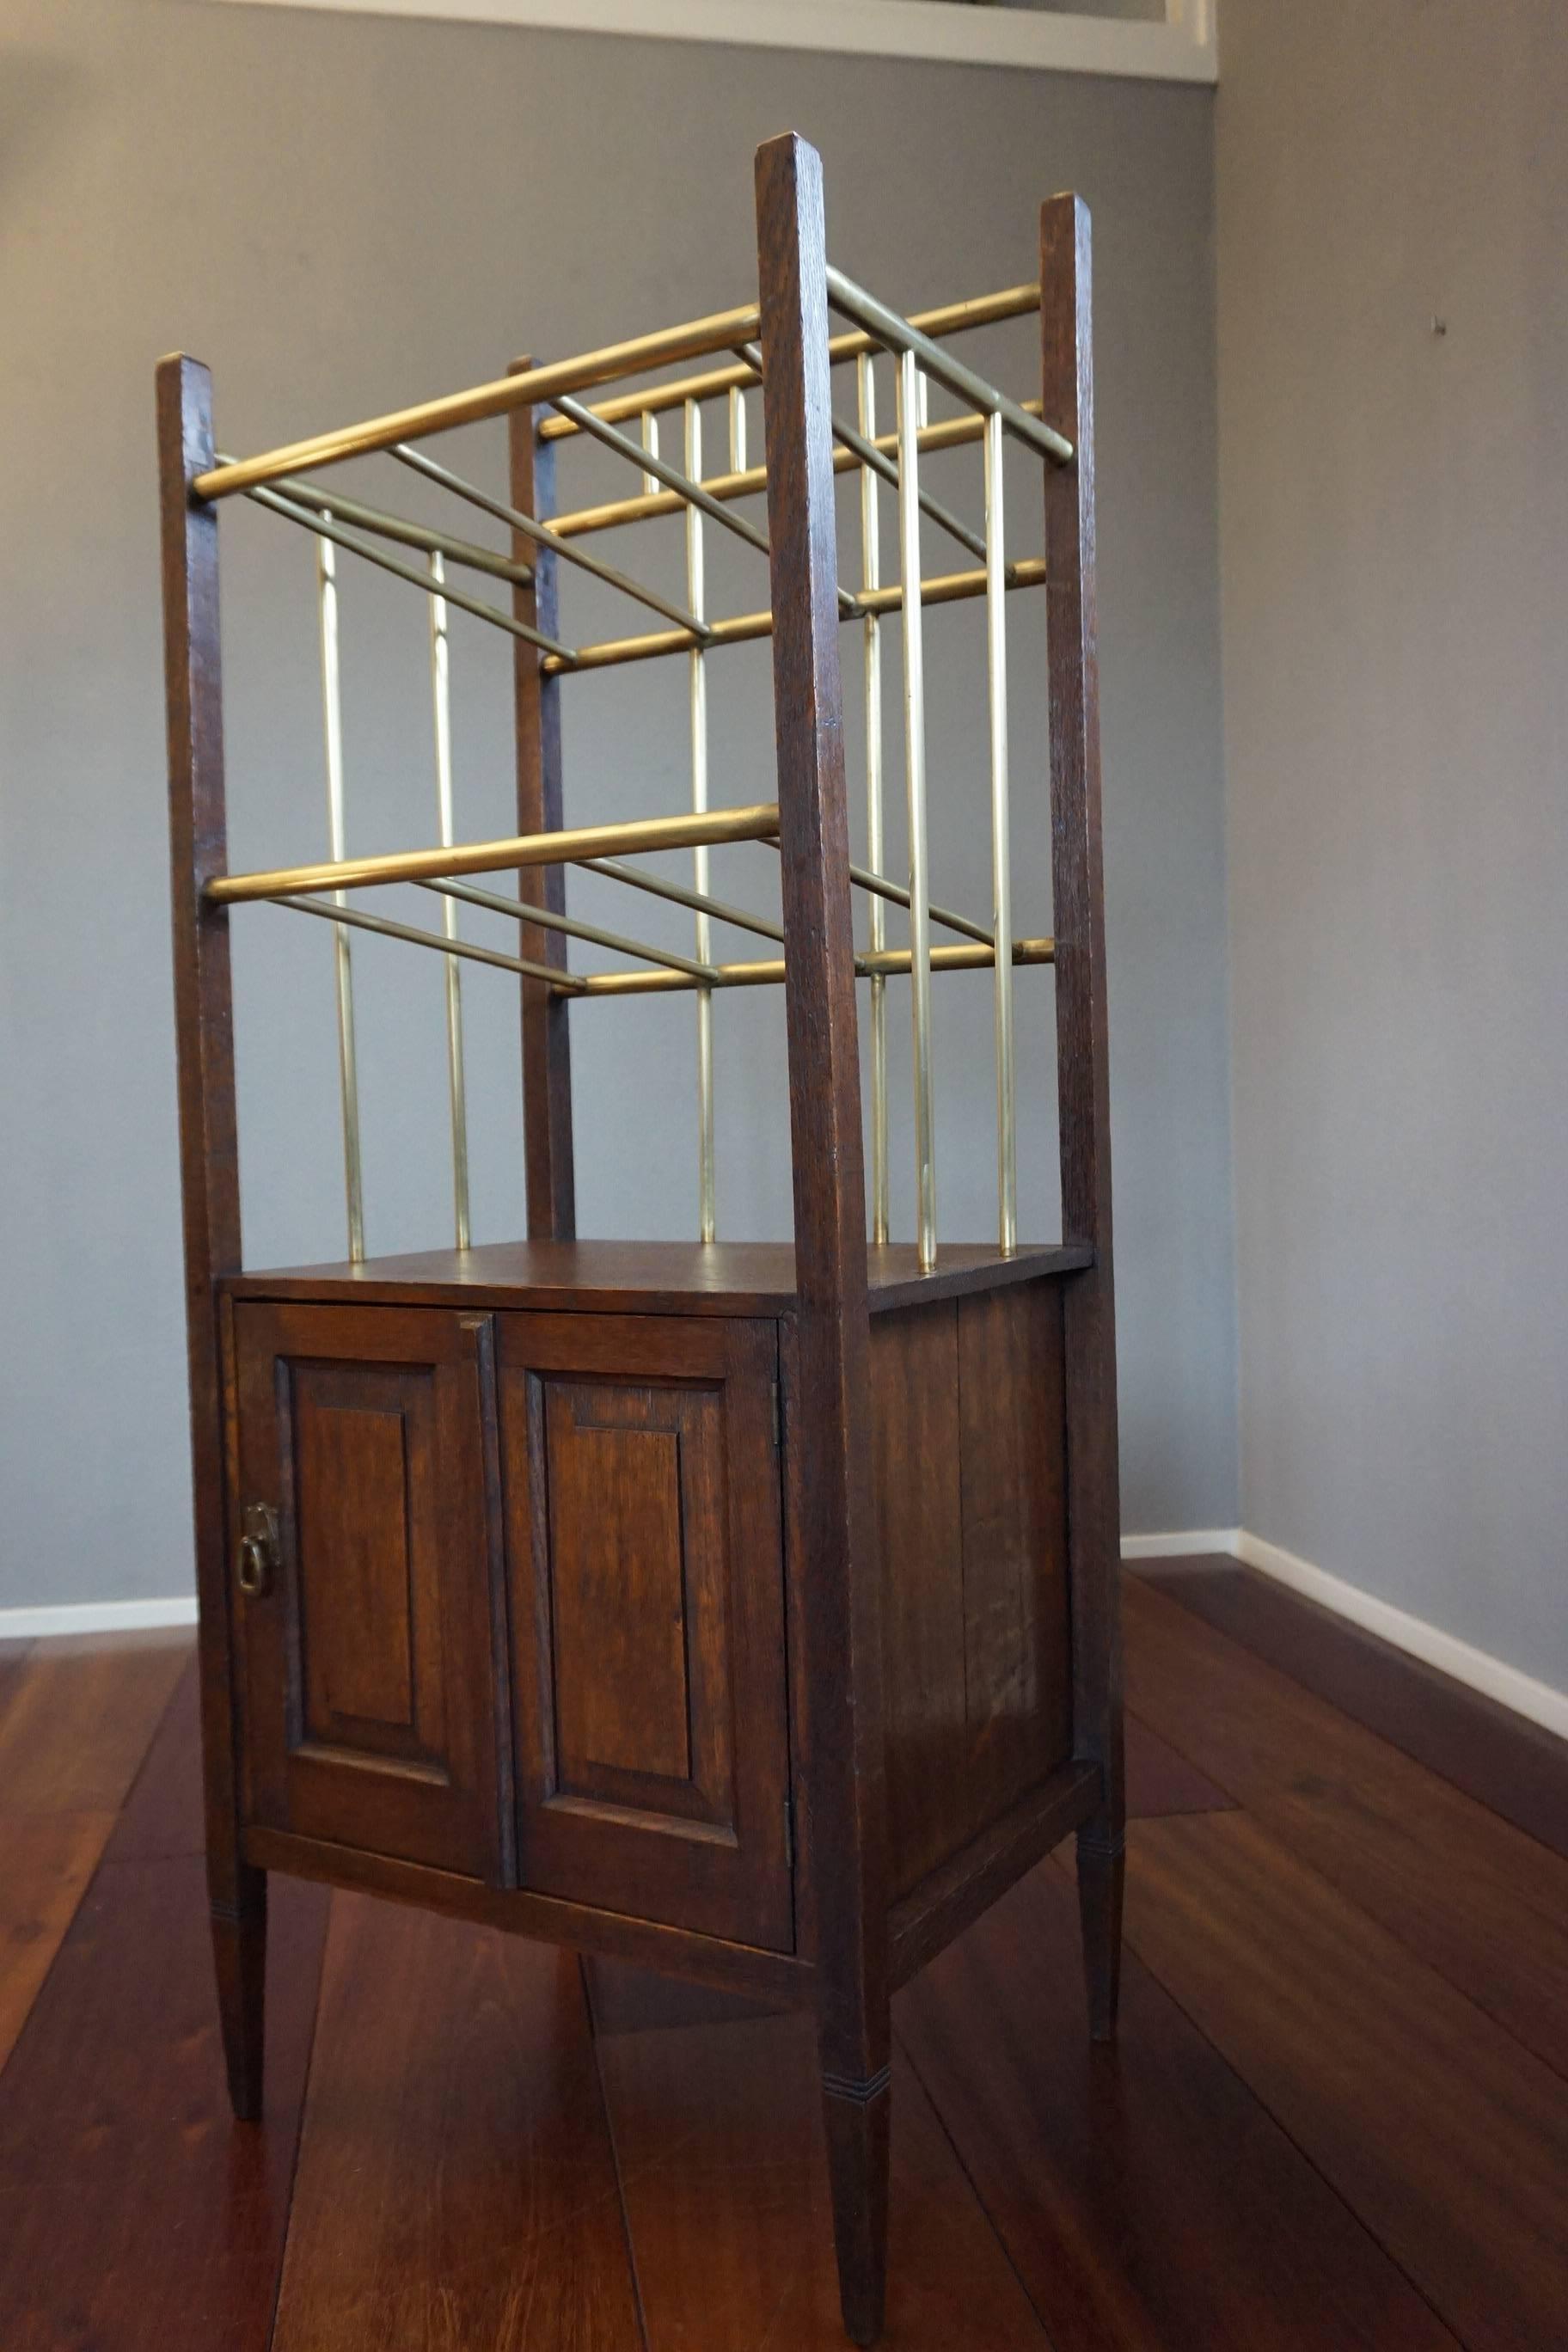 European Arts & Crafts Oak and Polished Brass Magazine Stand with Cabinet from circa 1900 For Sale